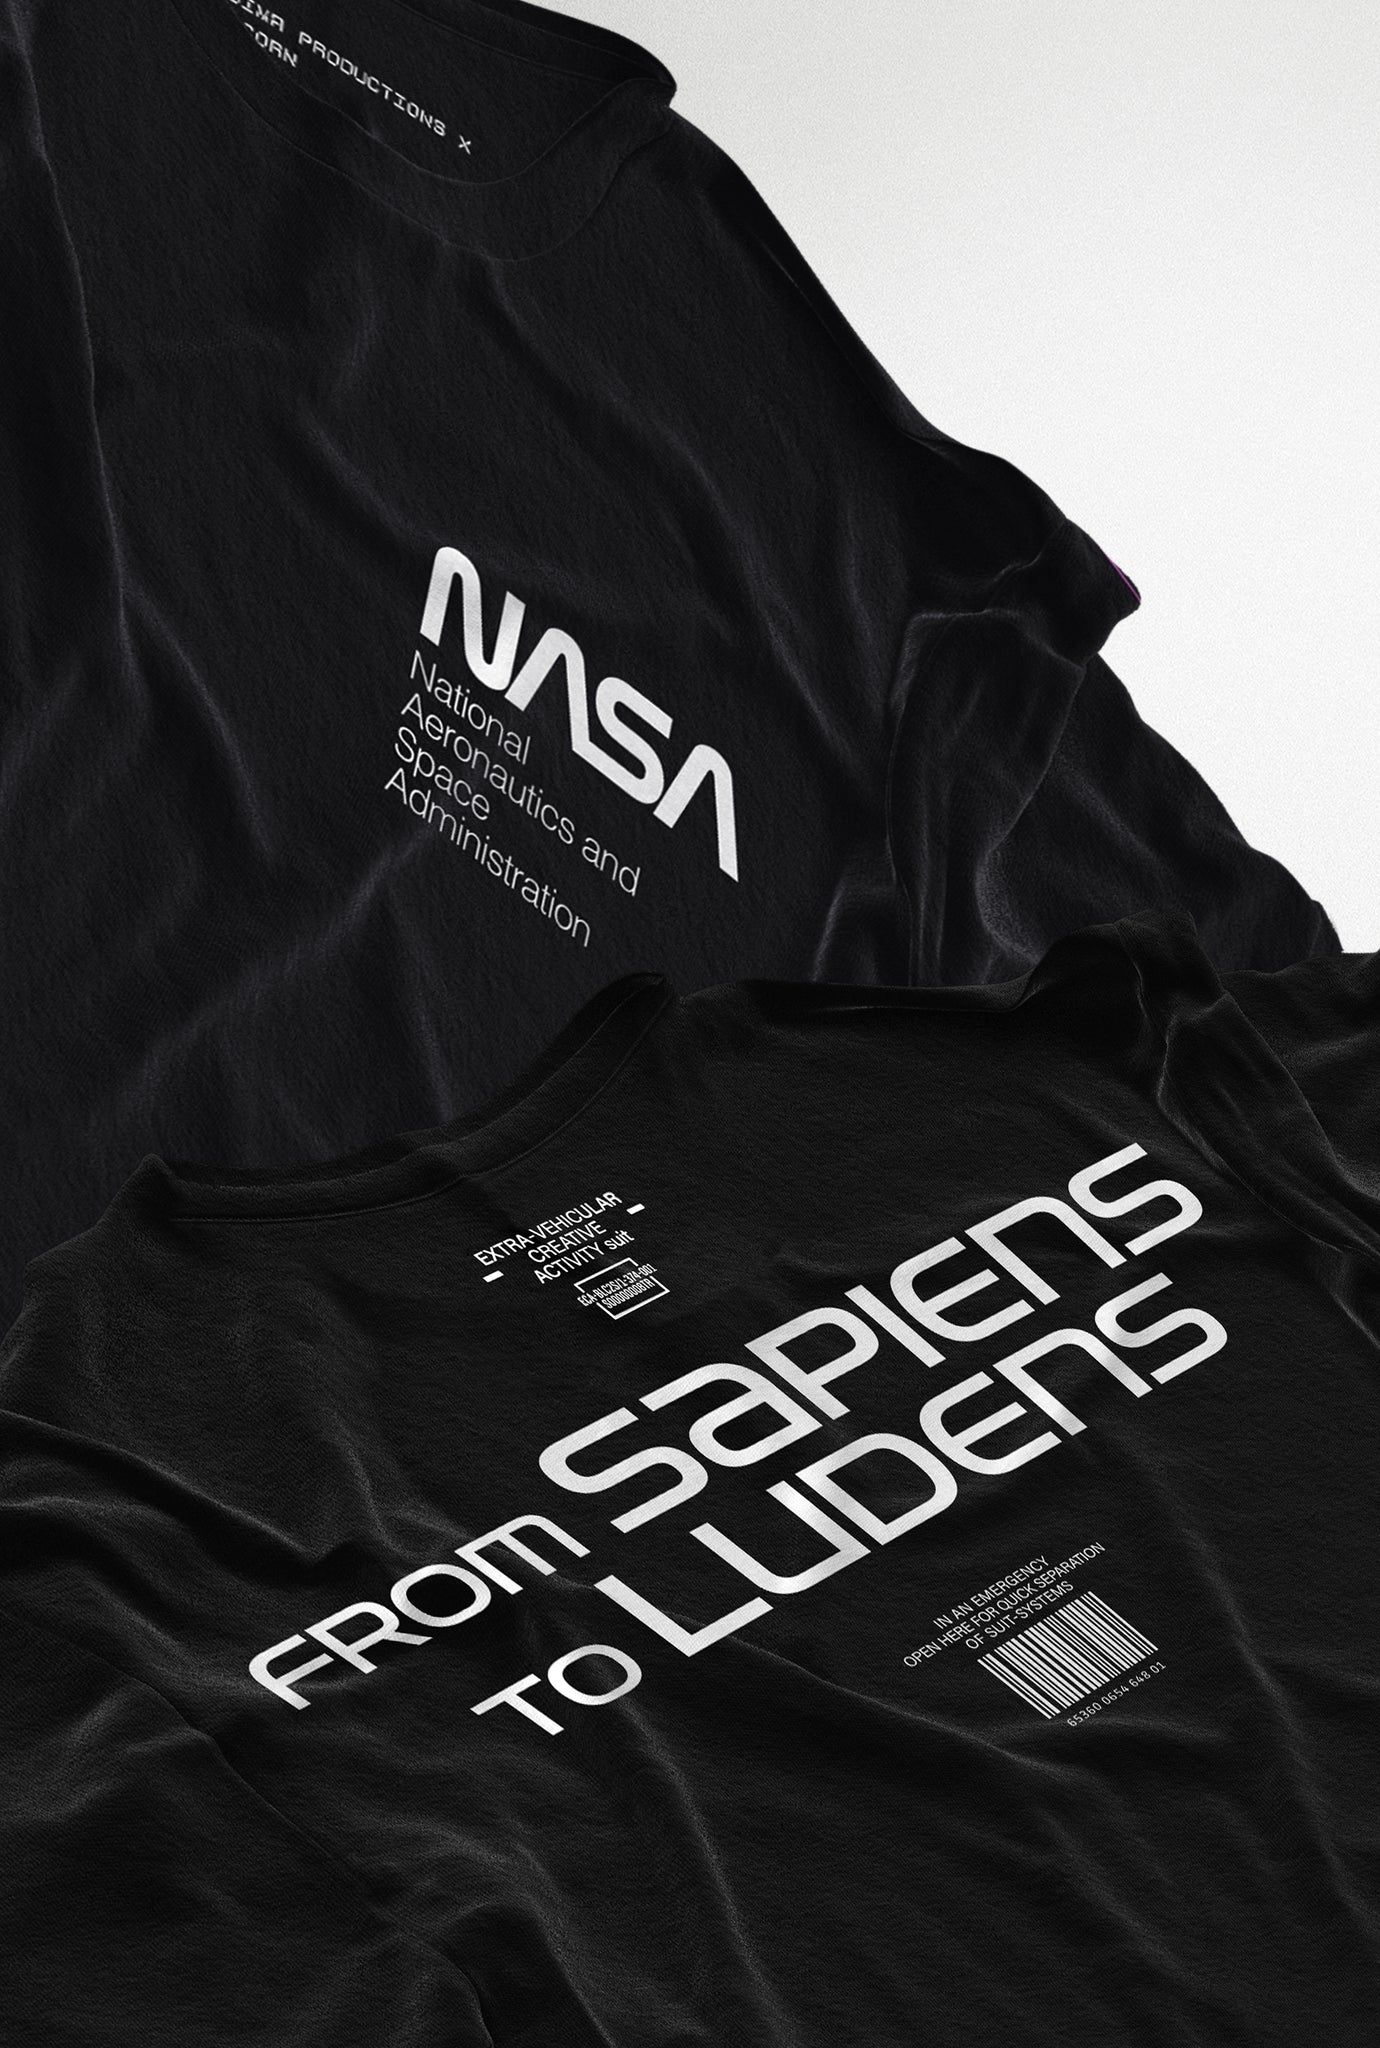 Space Ludens NASA Tee showing the essence of the collaboration project with style on both sides – front and back. The heavyweight tee has the NASA worm logo printed on the front and KOJIMA PRODUCTIONS’ motto “From Sapiens to Ludens” with graphics on Ludens EVA Creative Suit printed at the back.